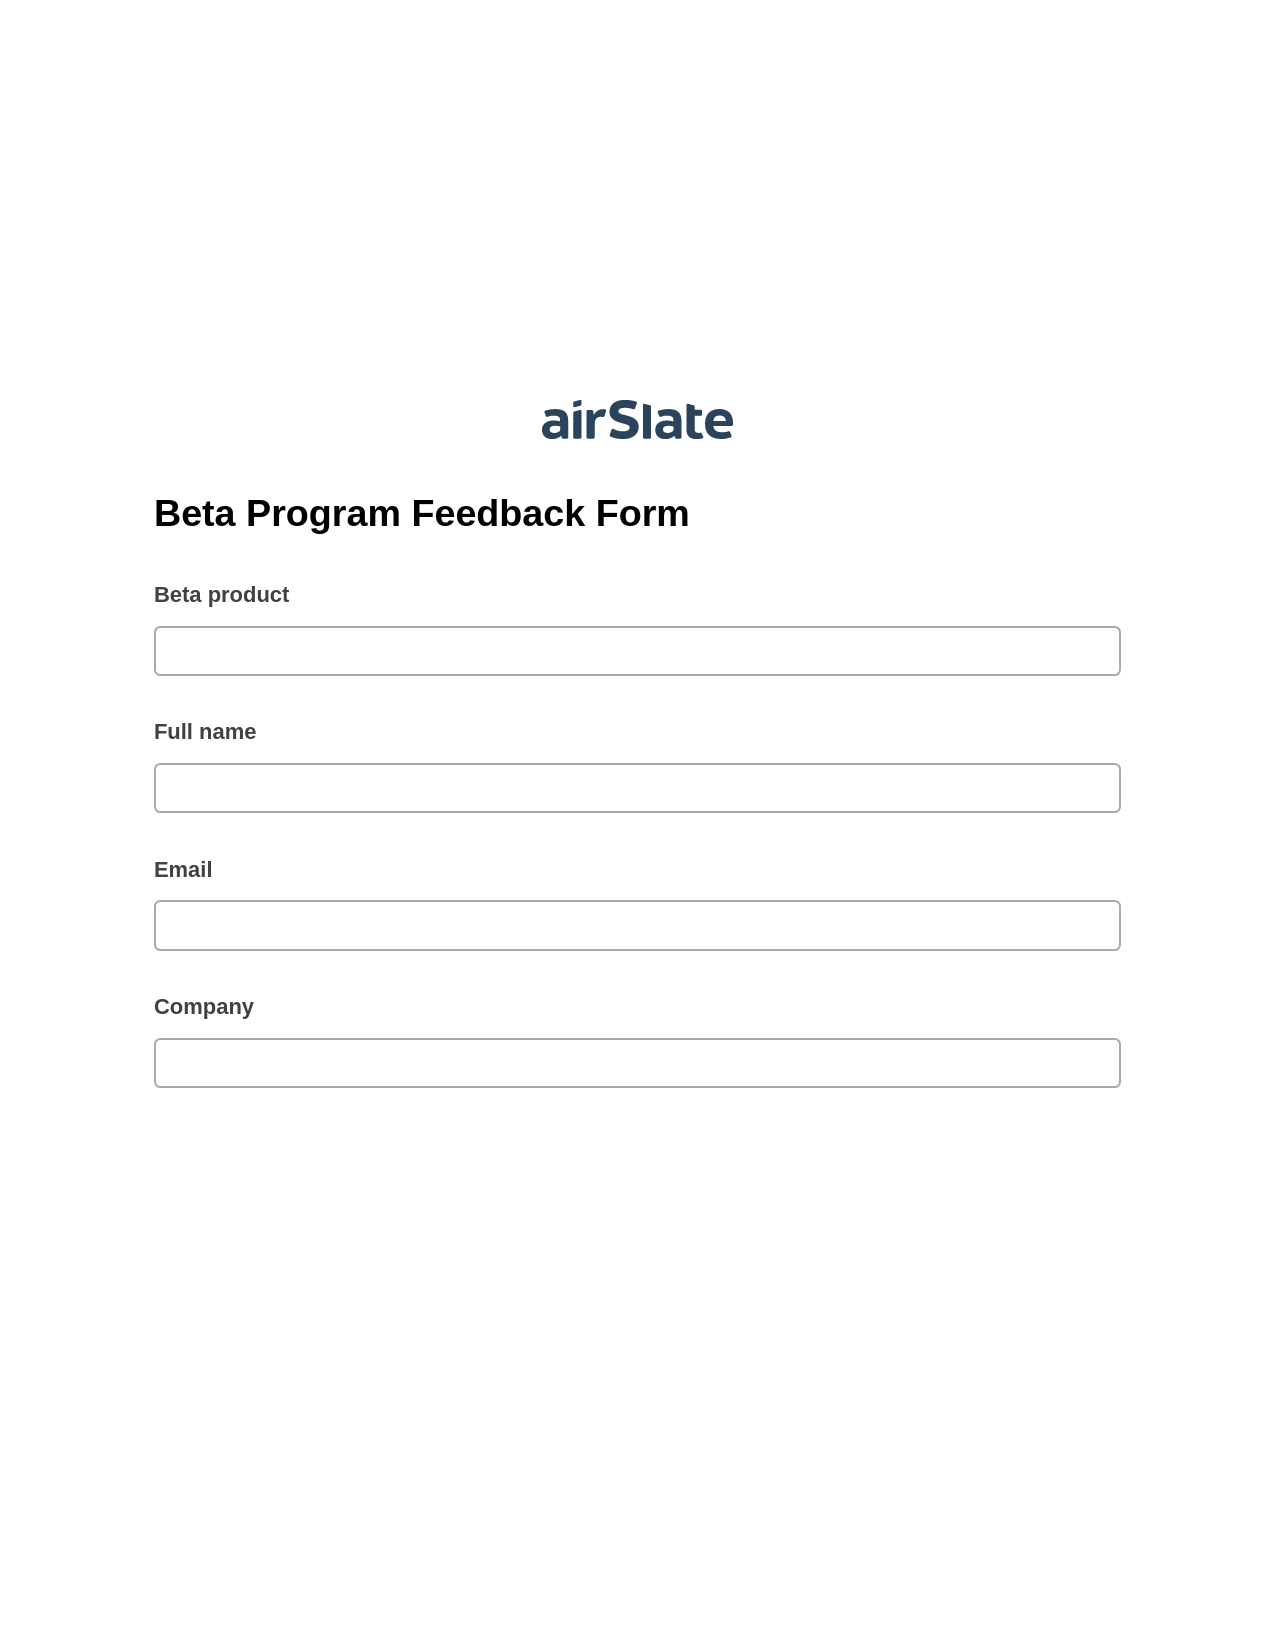 Multirole Beta Program Feedback Form Pre-fill from Google Sheets Bot, Send a Slate to Salesforce Contact Bot, Export to Smartsheet